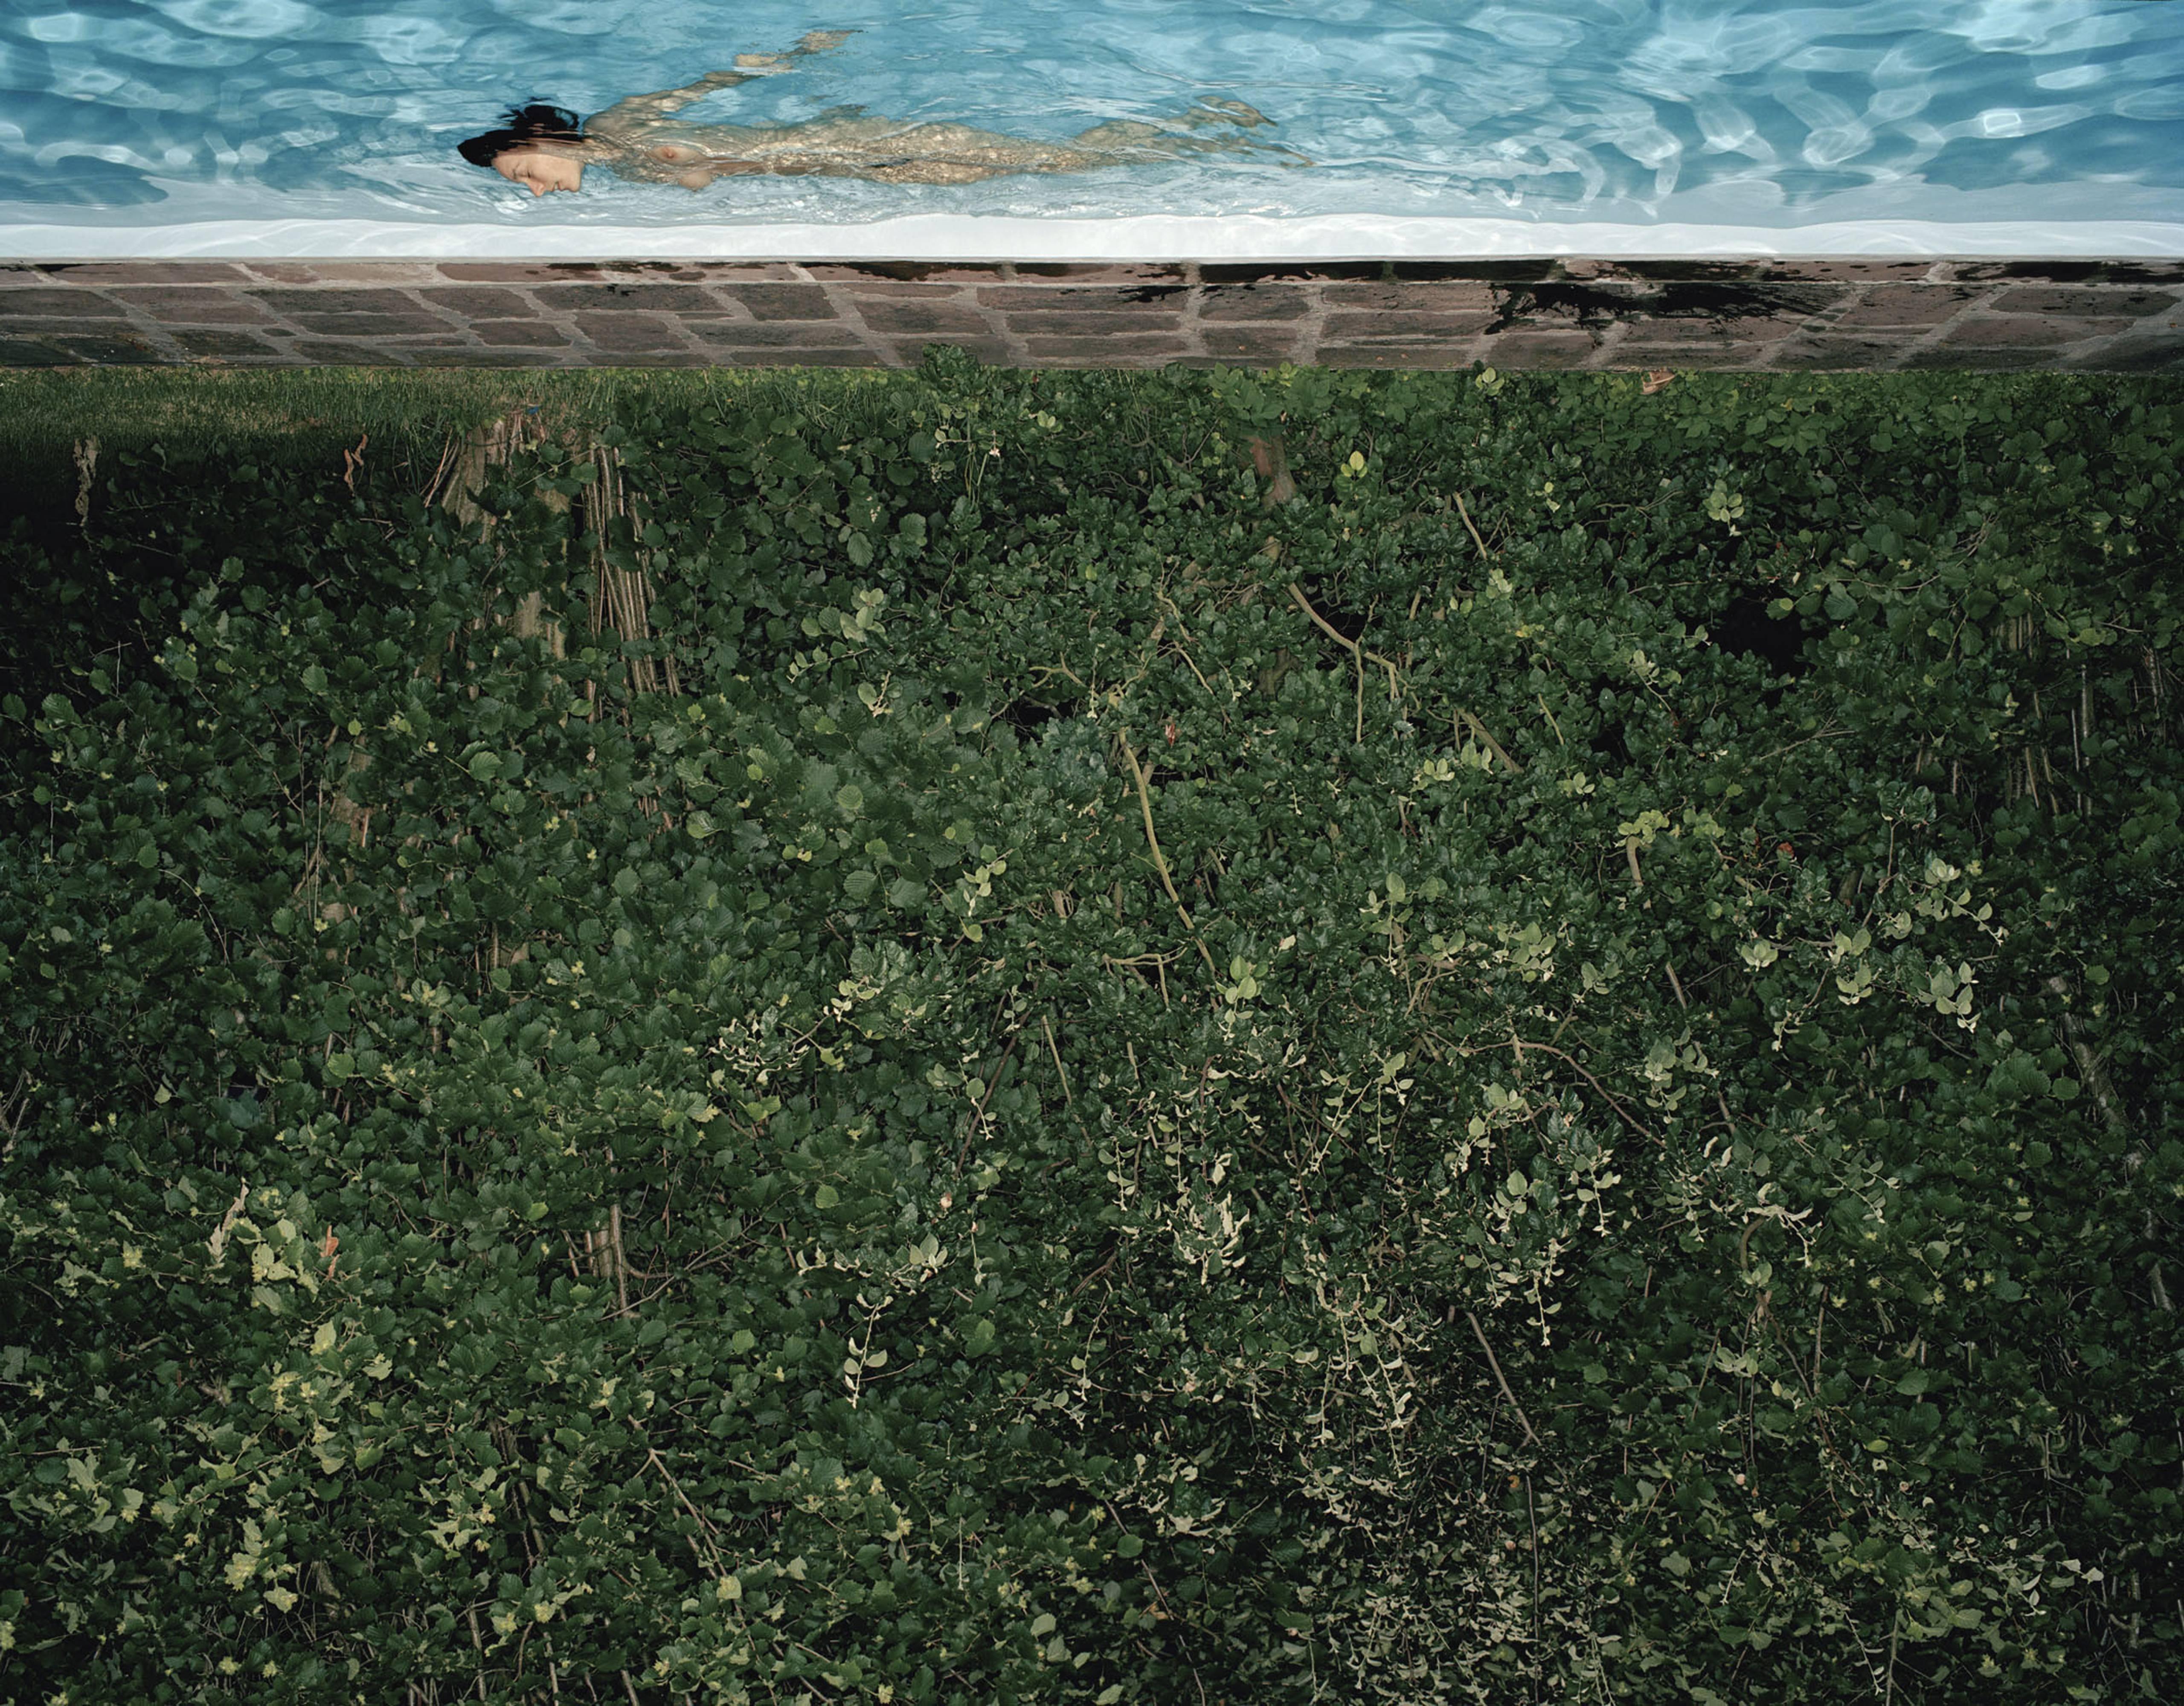 Swimming Pool - Photograph by Christian Vogt